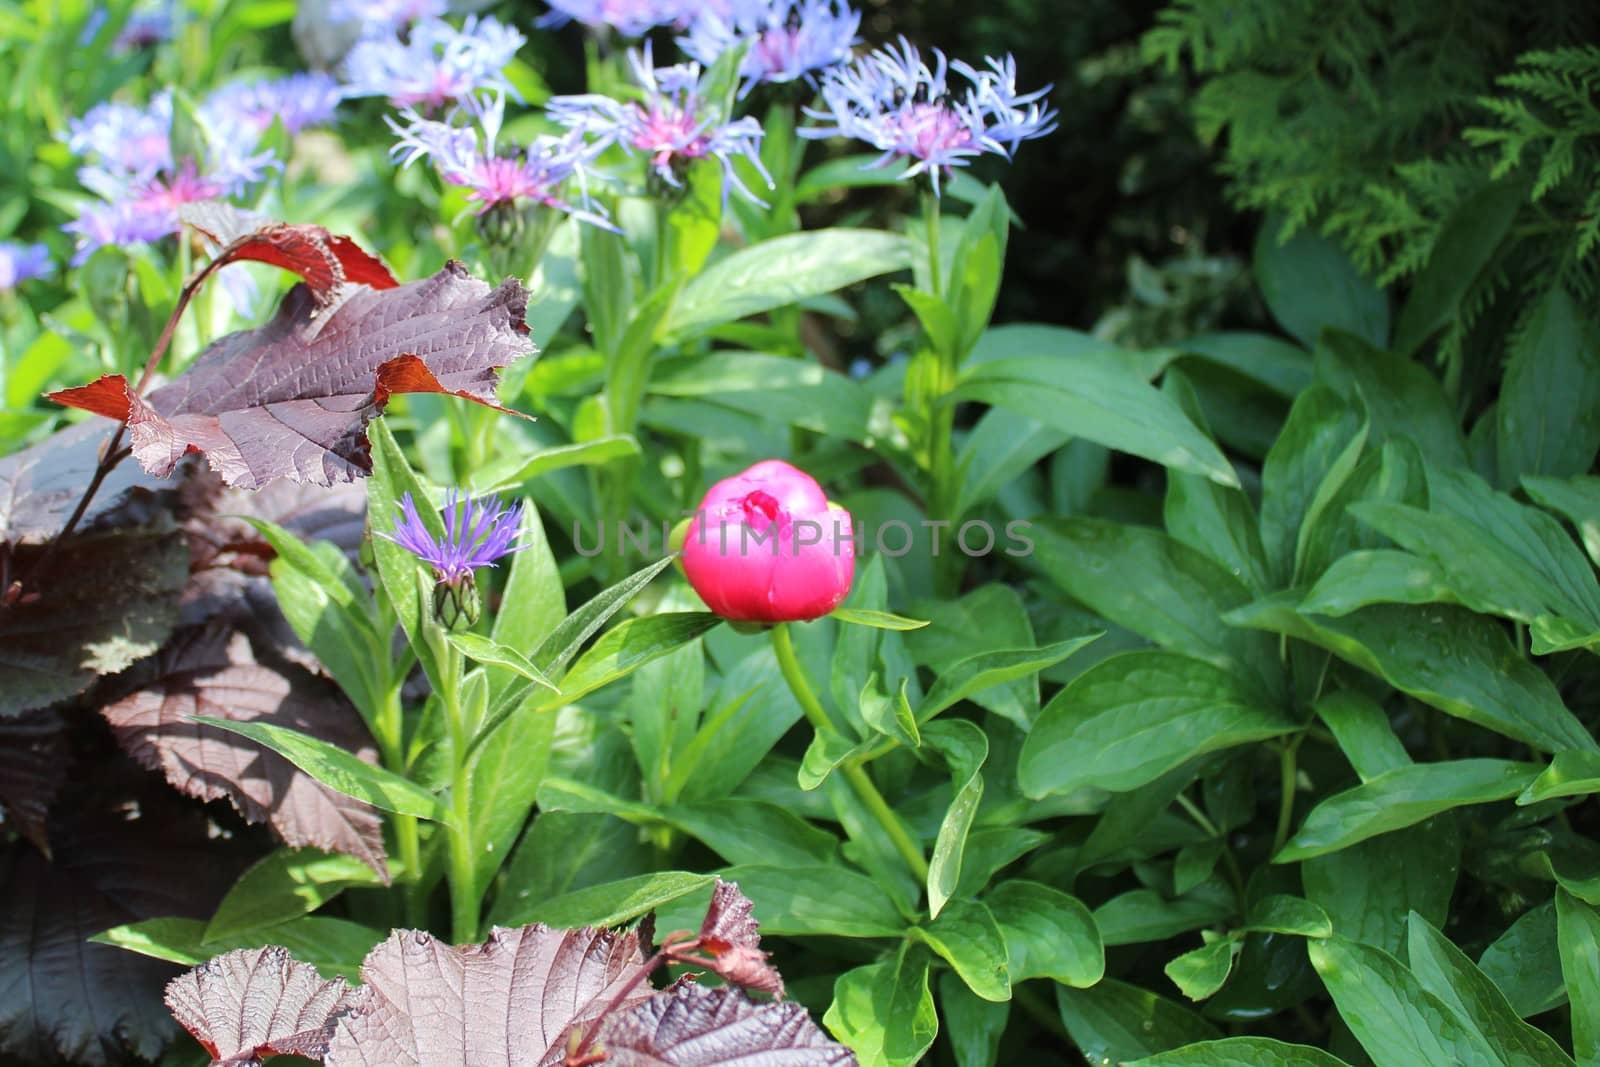 The picture shows blossoming peony in the garden.